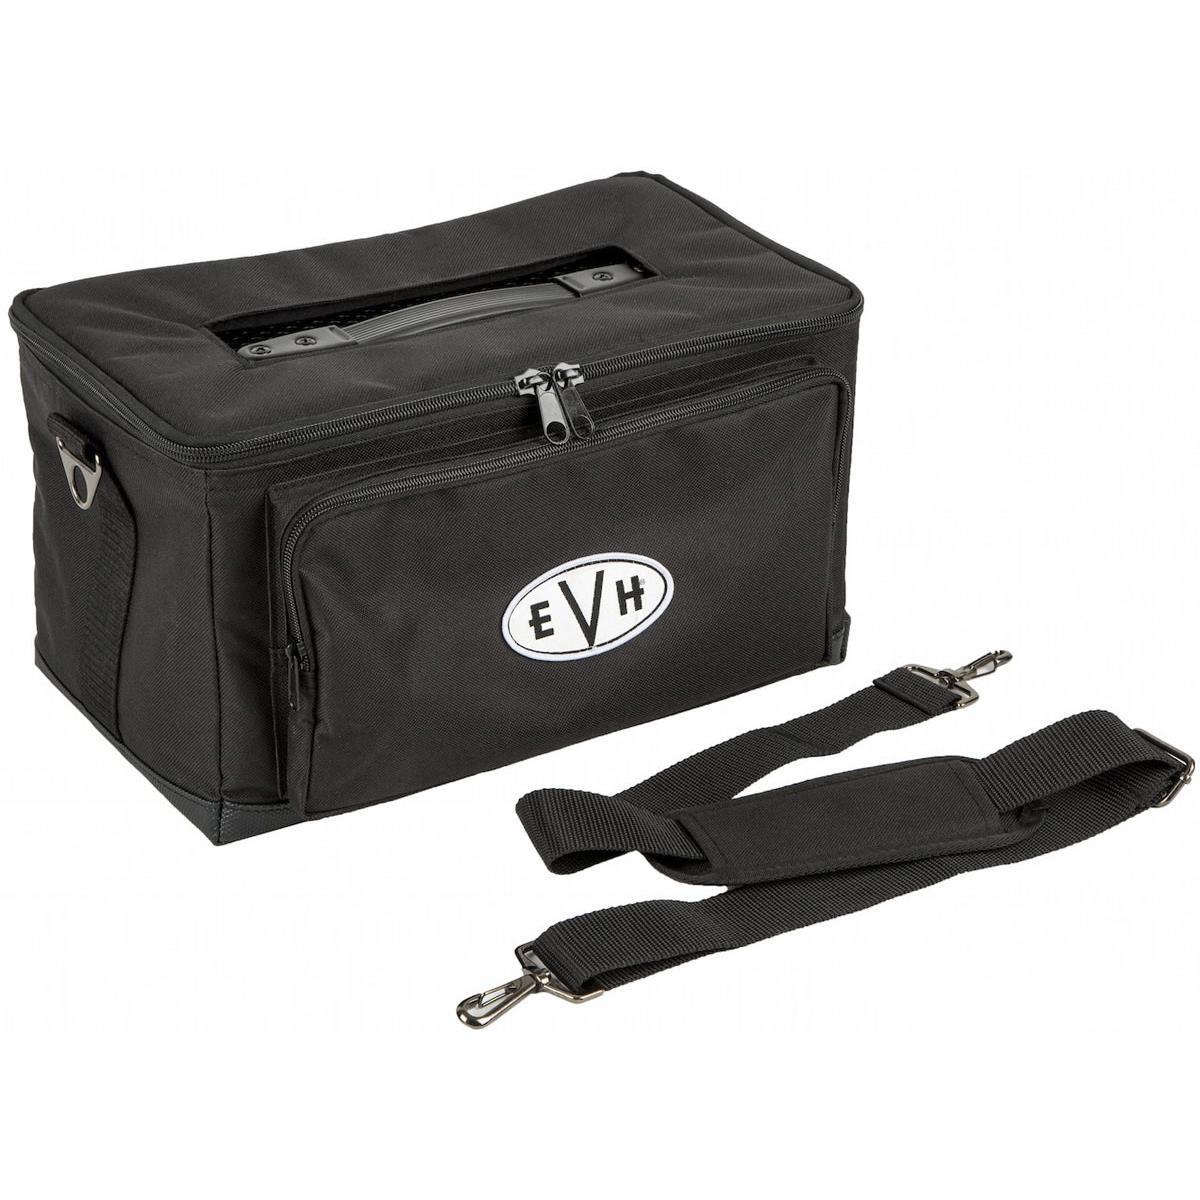 EVH 5150III Lunchbox Amp Carrying Case Carry your EVH 5150III LBX Head to the gig in comfortable style with this custom-designed soft case. Constructed from durable 600-denier nylon, this case will survive plenty of journeys to rehearsals and shows protecting your valuable amplifier the entire time. 8mm interior padding cradles your amp head softly, while the top access port provides an easy way to grab your amps handle and hit the road. A strong padded canvas shoulder strap allows you to sling the head comfortably over your shoulder and the non-slip bottom surface helps your case stay put wherever you set it down. An easy access front panel keeps the amps power cable conveniently close and can also hold spare fuses, a speaker cable or other accessories. The large EVH oval logo on the front leaves no doubt as to which amp this case belongs with.